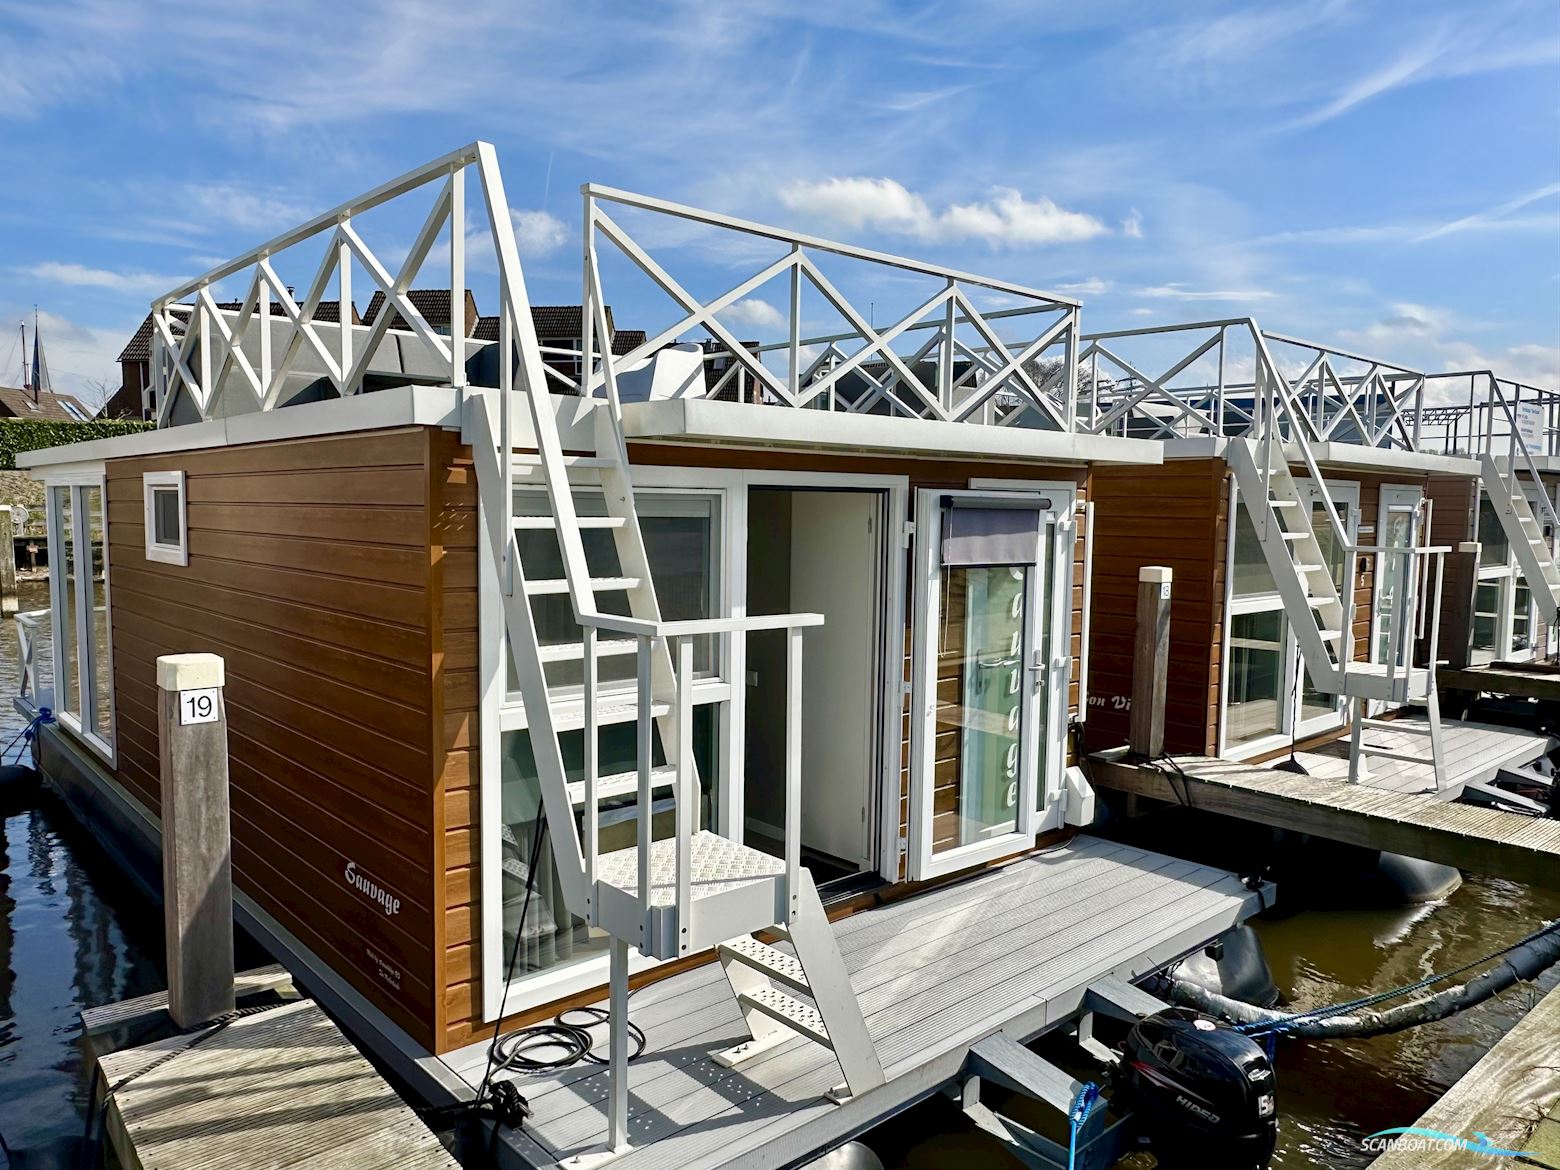 Havenlodge Melite Houseboat Live a board / River boat 2022, with Suzuki engine, The Netherlands